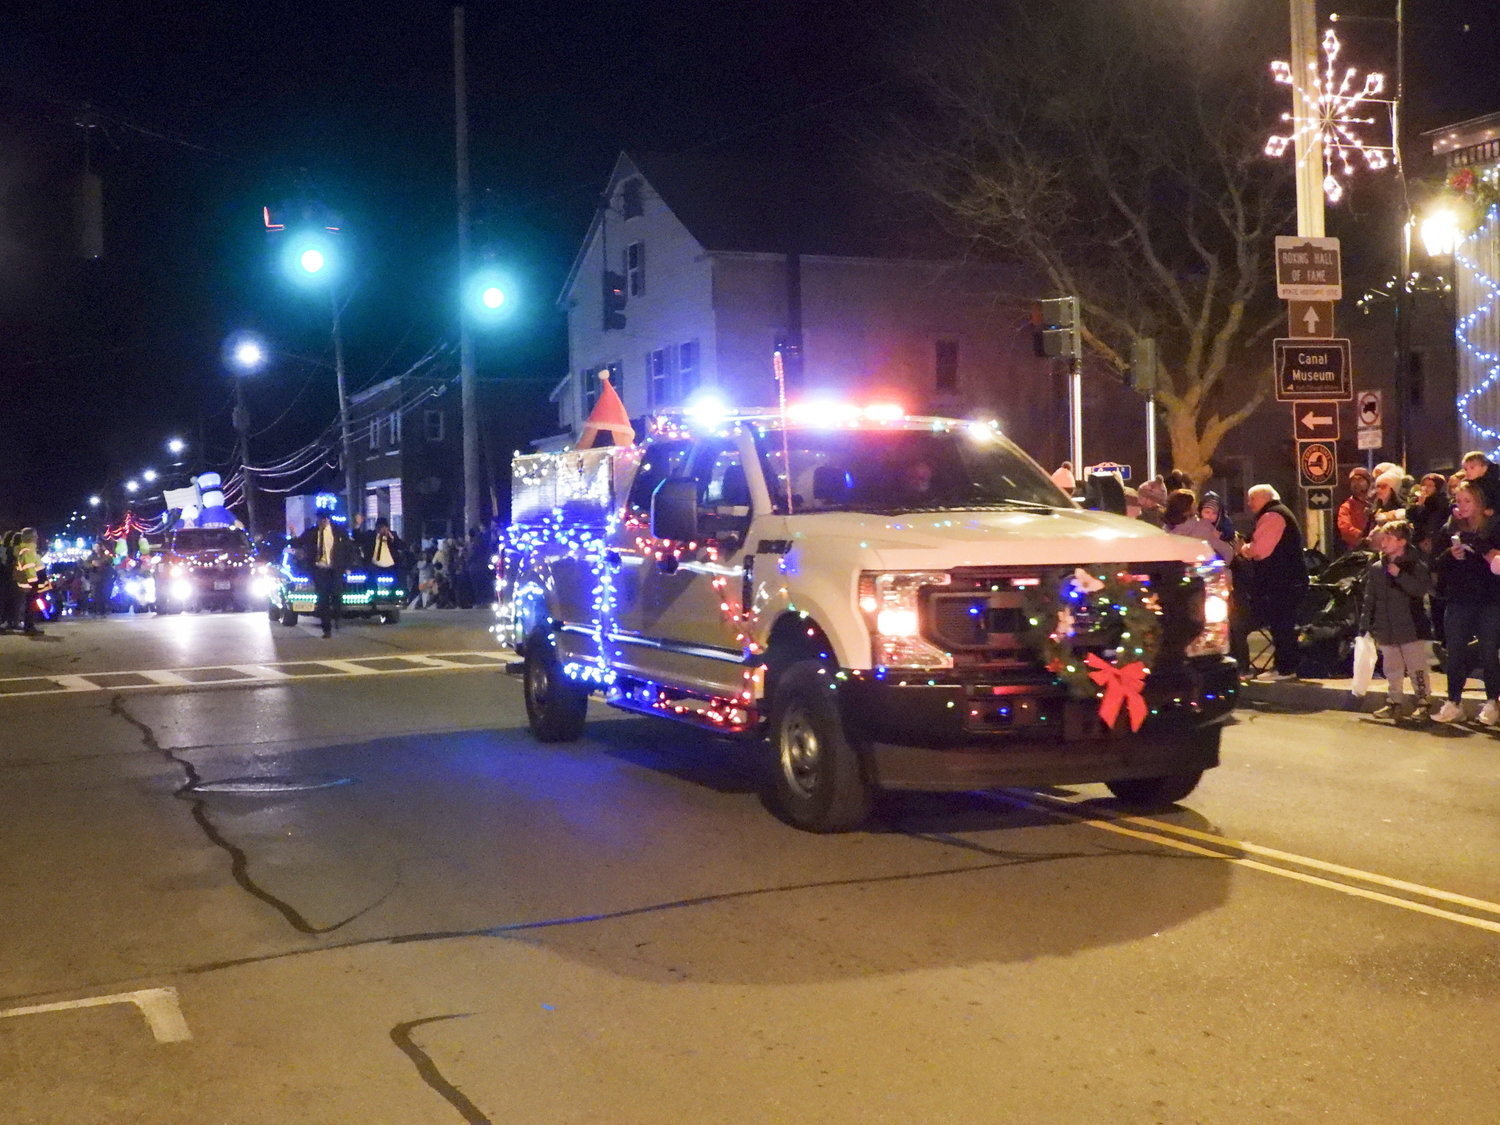 The Canastota Parade of Lights saw people fill the streets Saturday night to welcome in the holiday season.